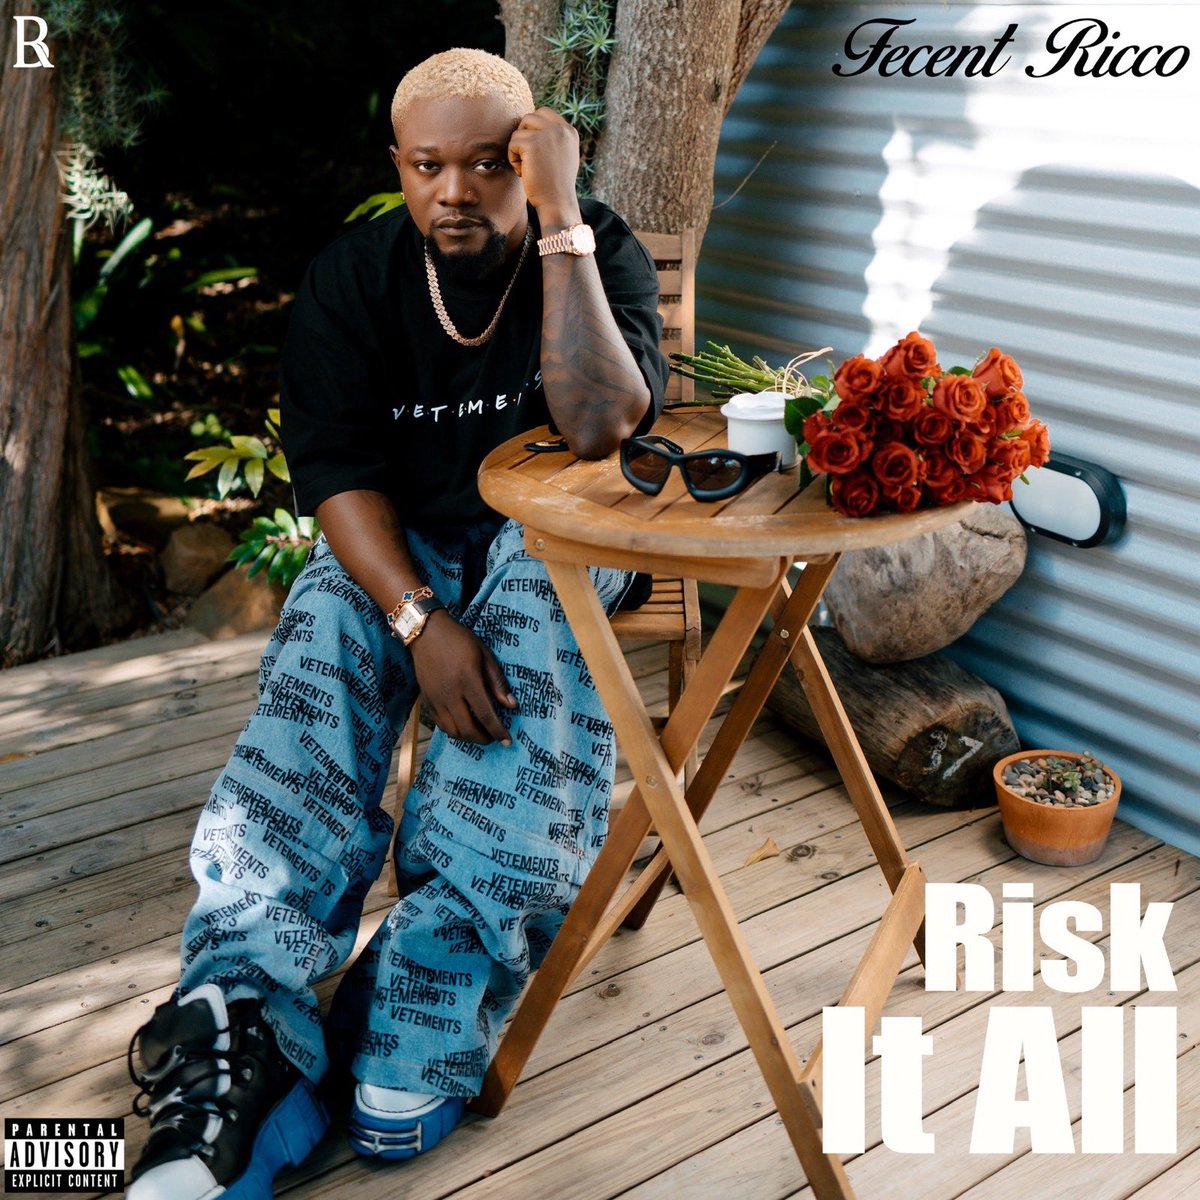 .@fecentricco is ready to “Risk It All” on this groovy vibe. 

LISTEN: amack.it/riskitall 

#keepthebeatgoing